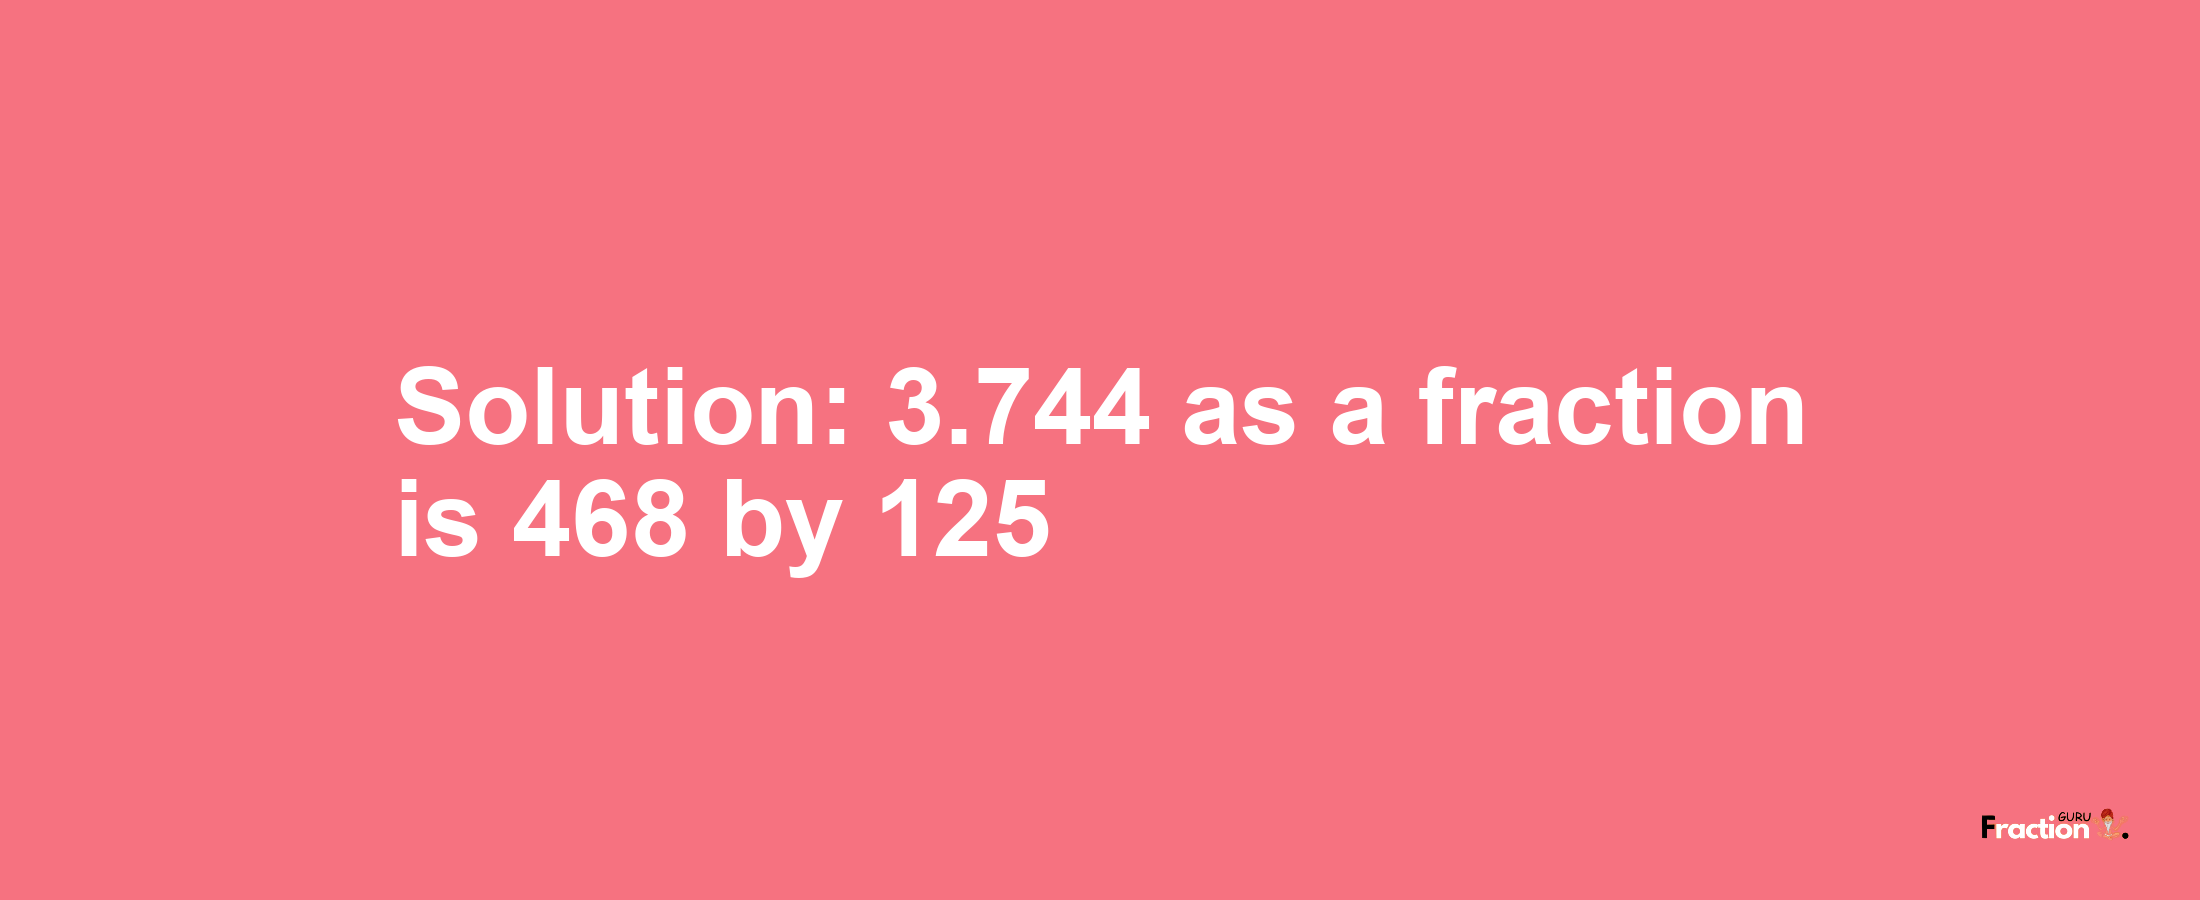 Solution:3.744 as a fraction is 468/125